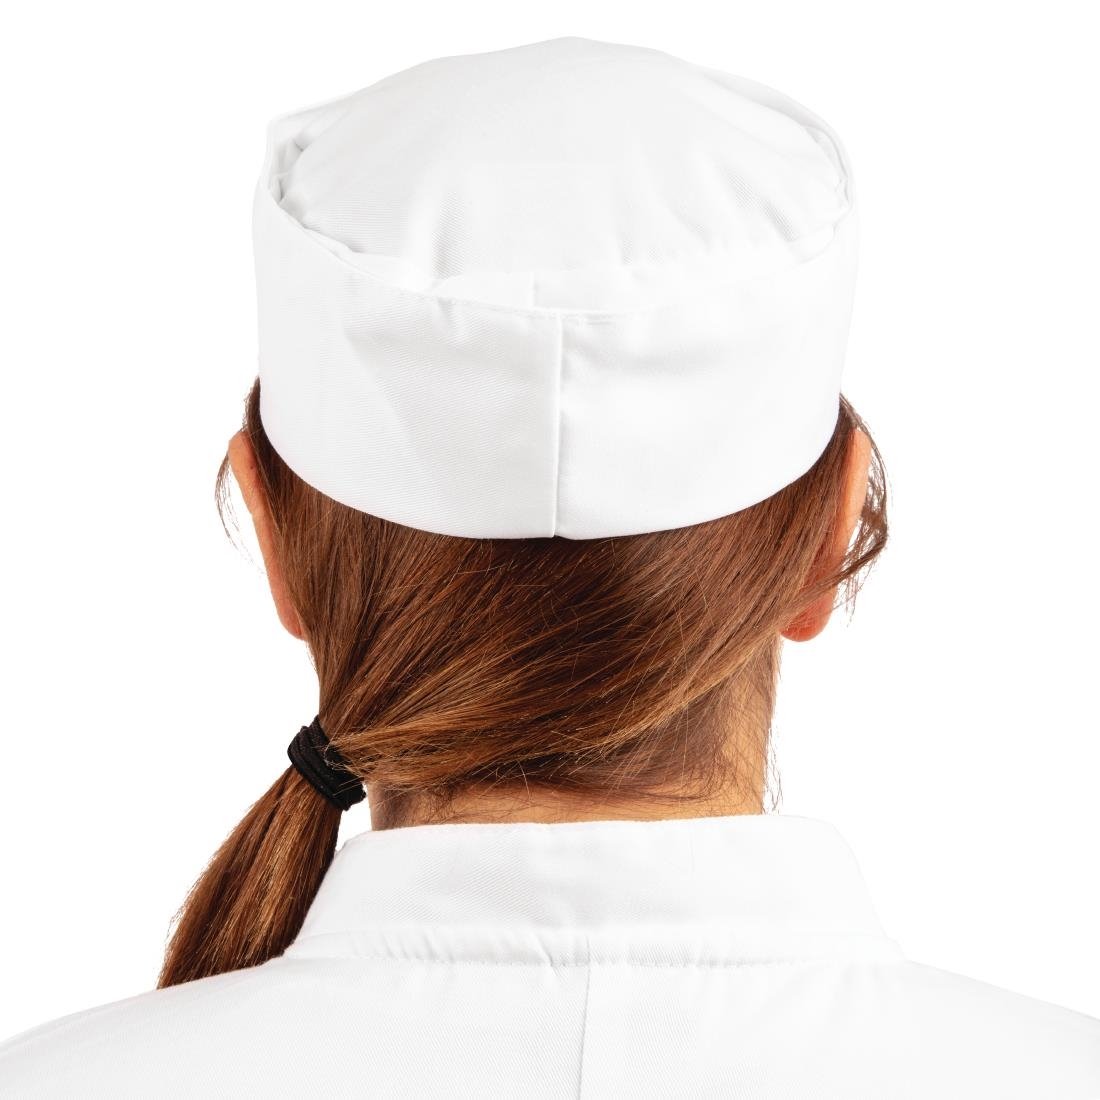 A203-XL Whites Chefs Unisex Skull Cap Polycotton White - XL JD Catering Equipment Solutions Ltd